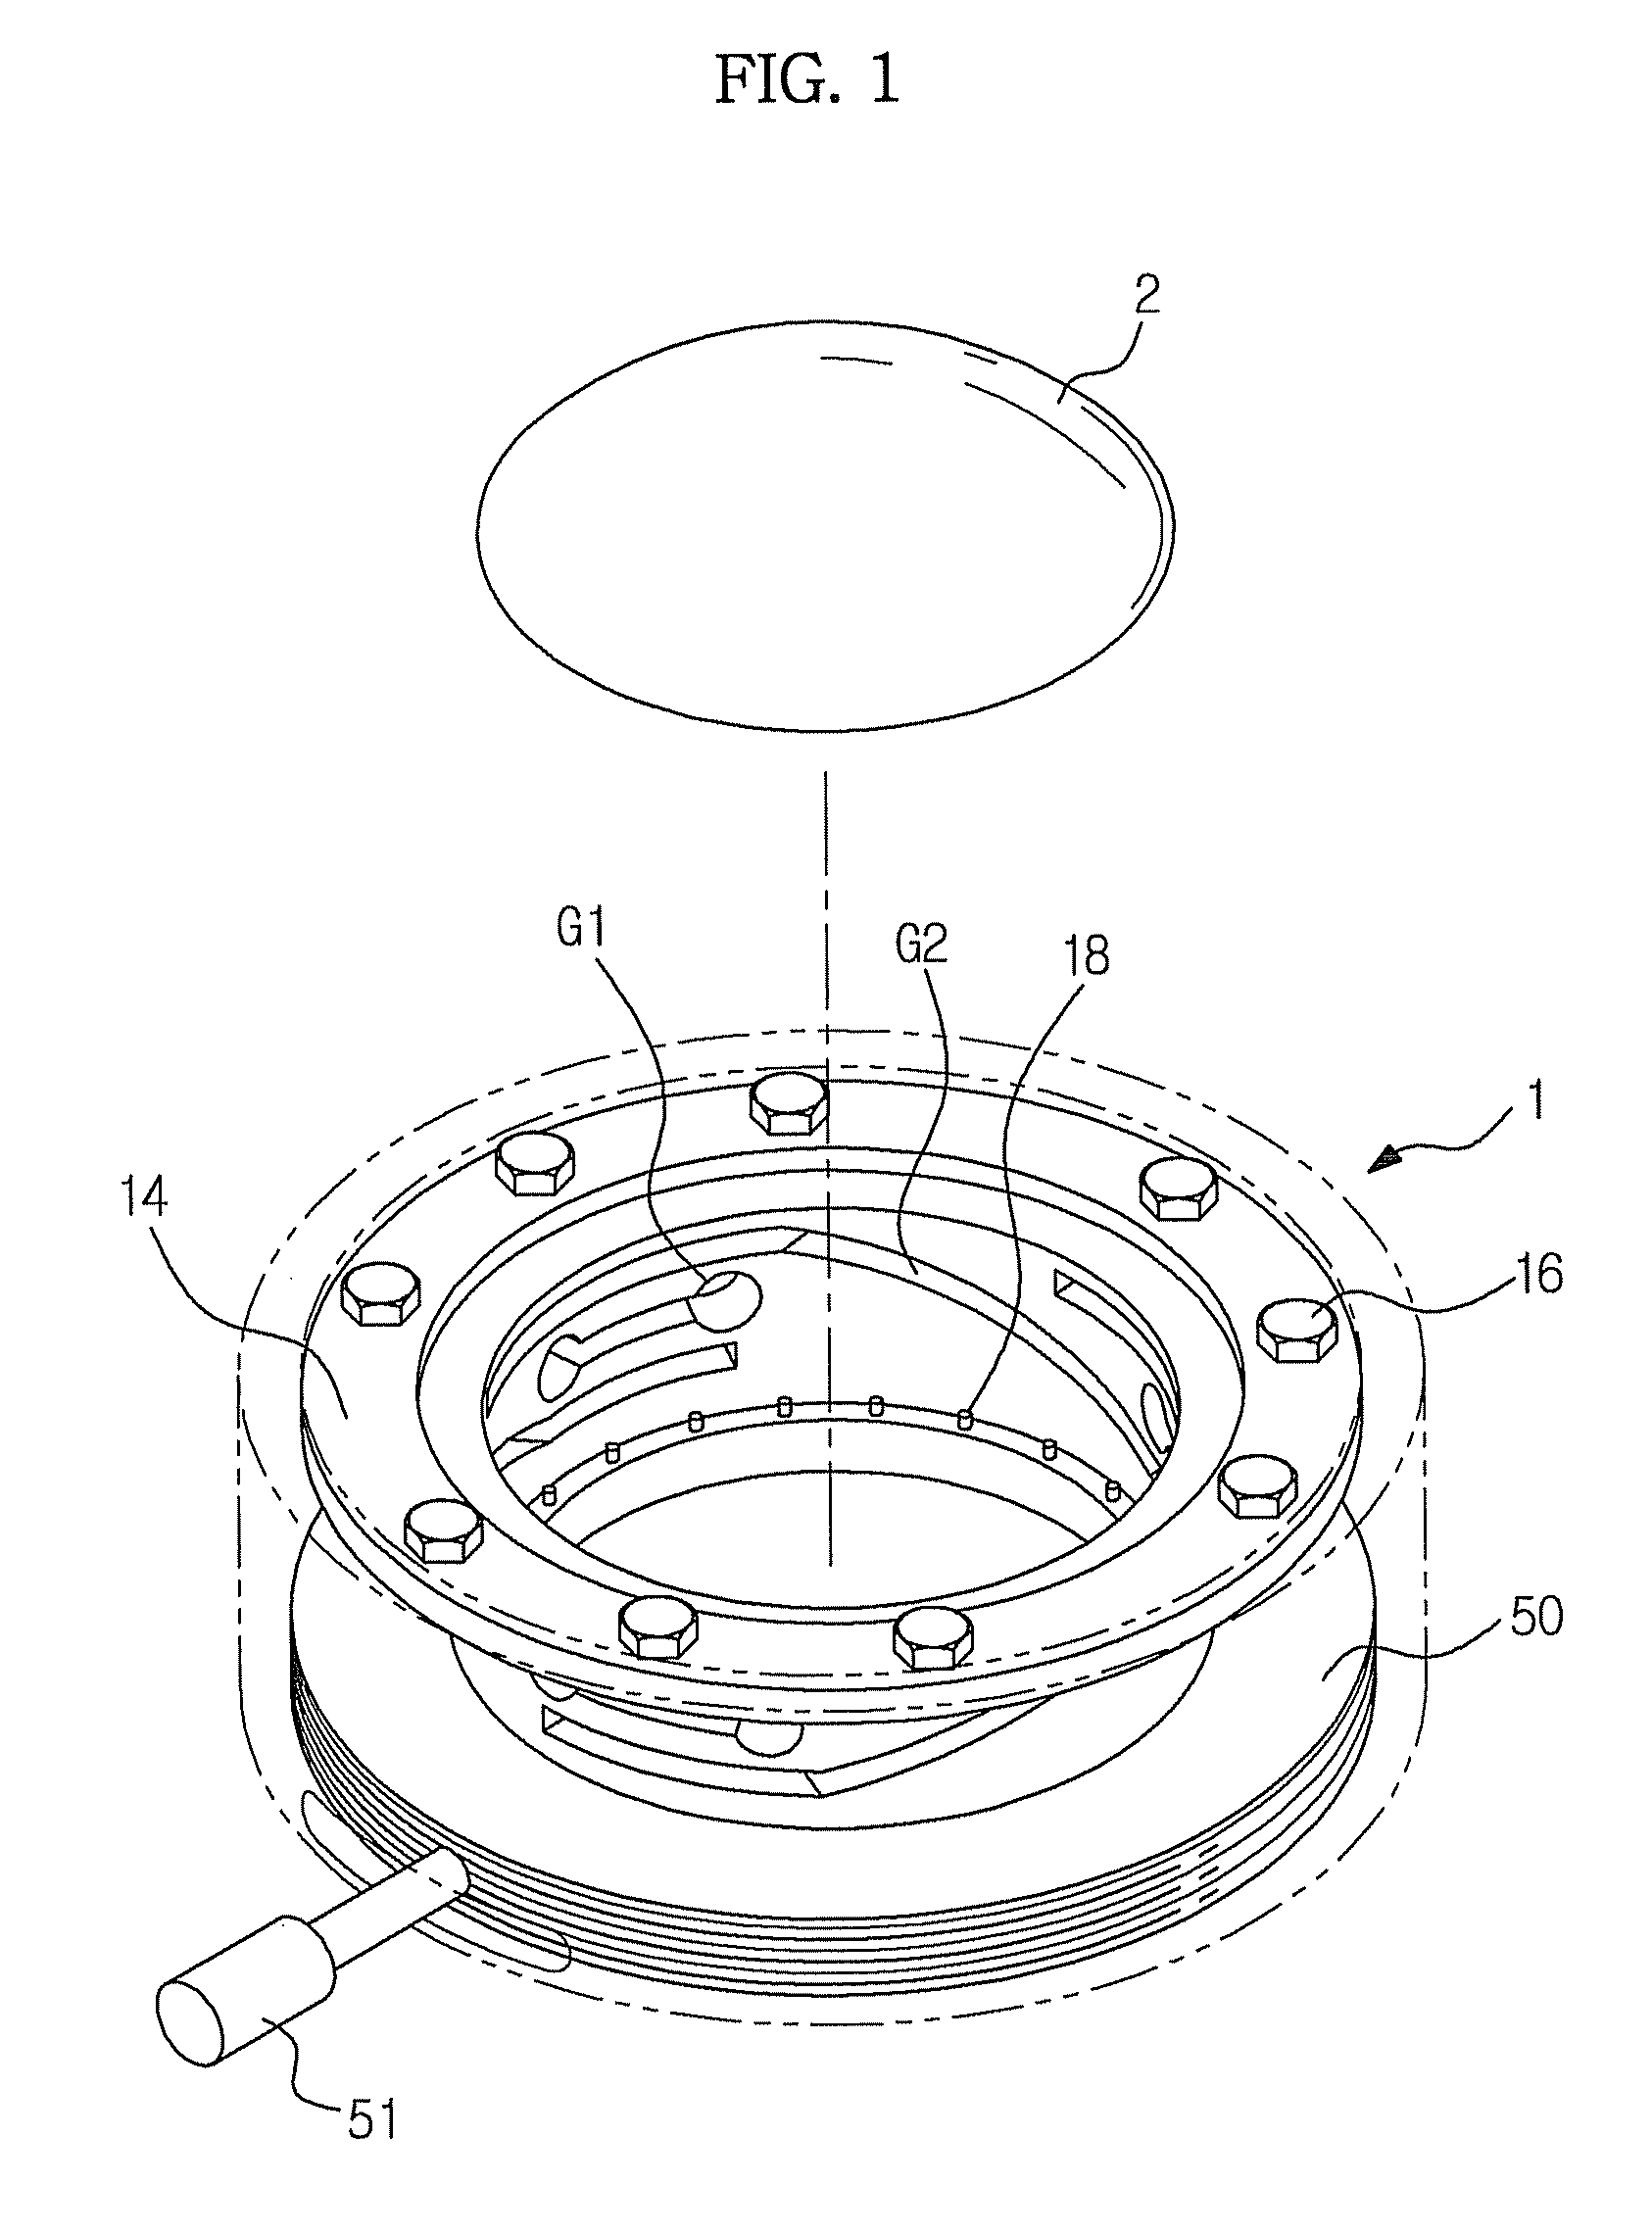 Lens positioning unit of optical system